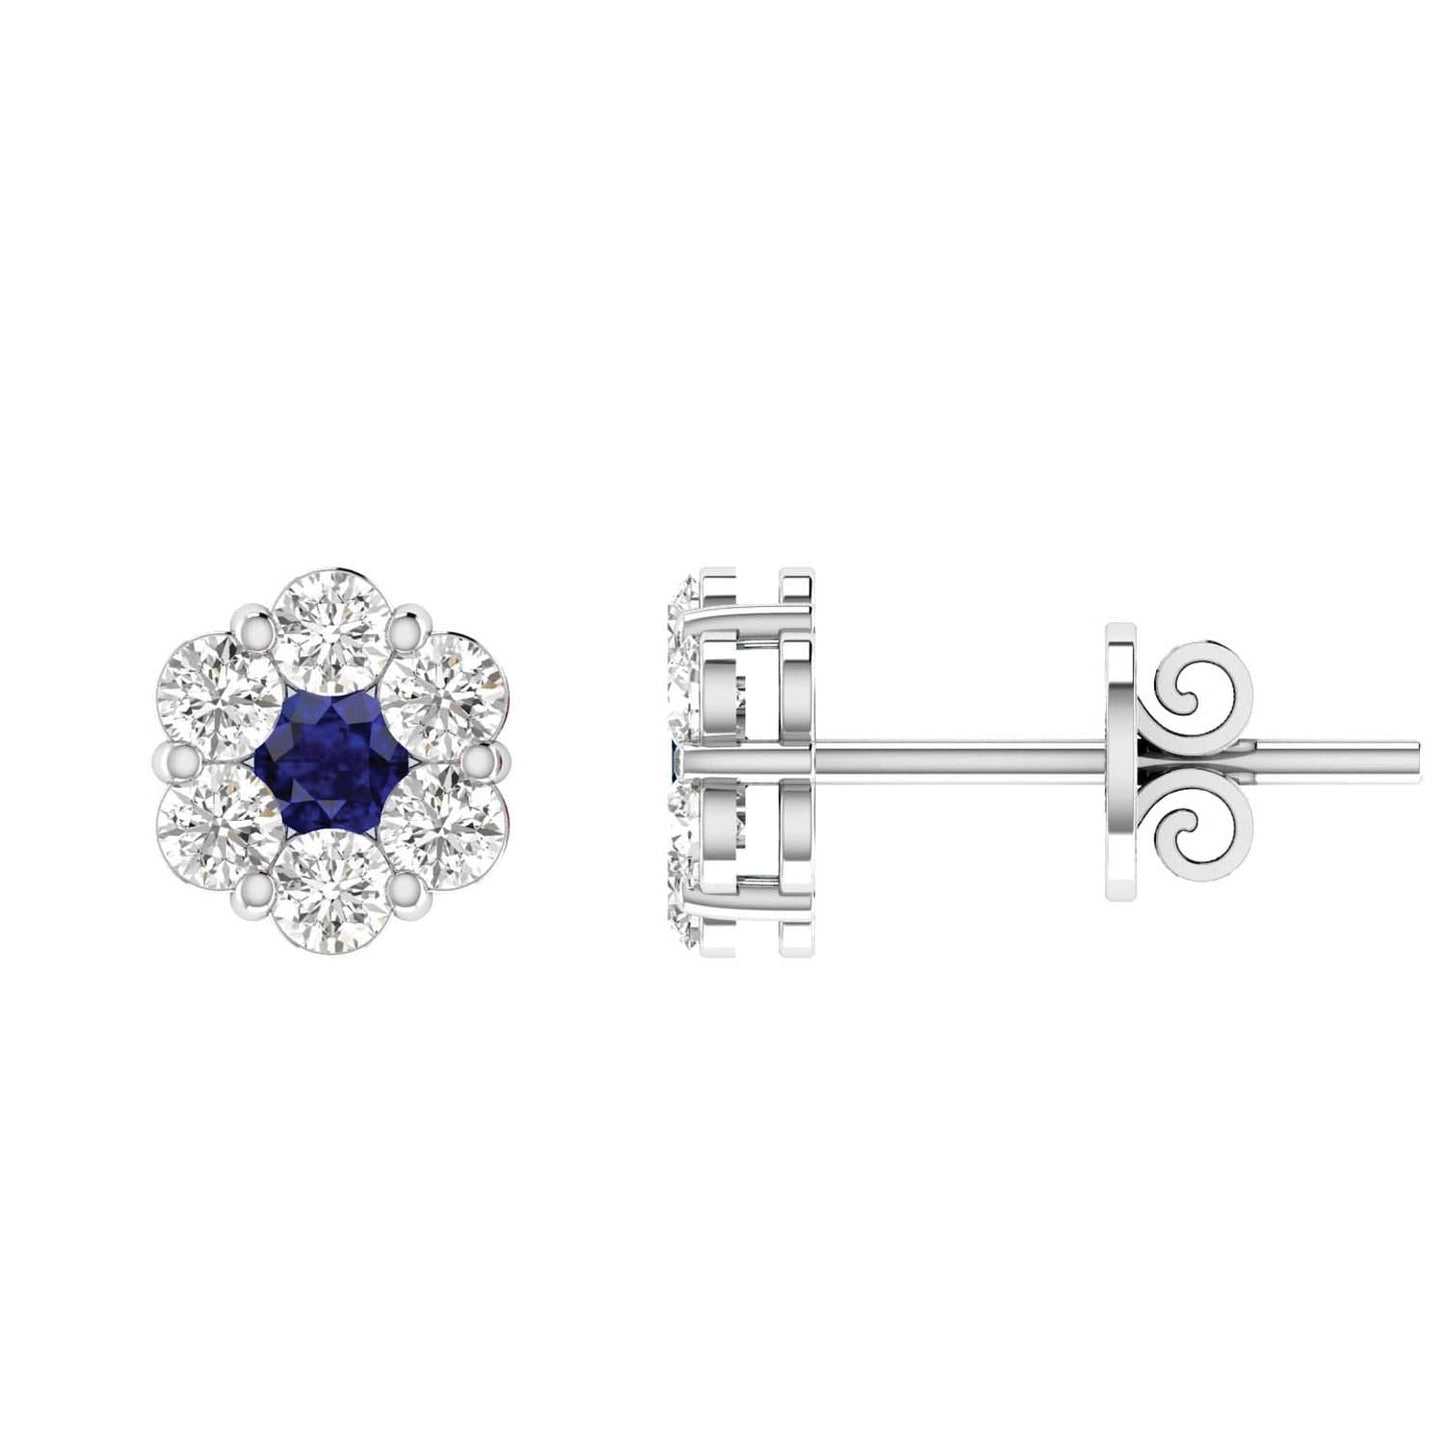 Sapphire Diamond Stud Earrings with 0.37ct Diamonds in 9K White Gold - 9WRE50GHS